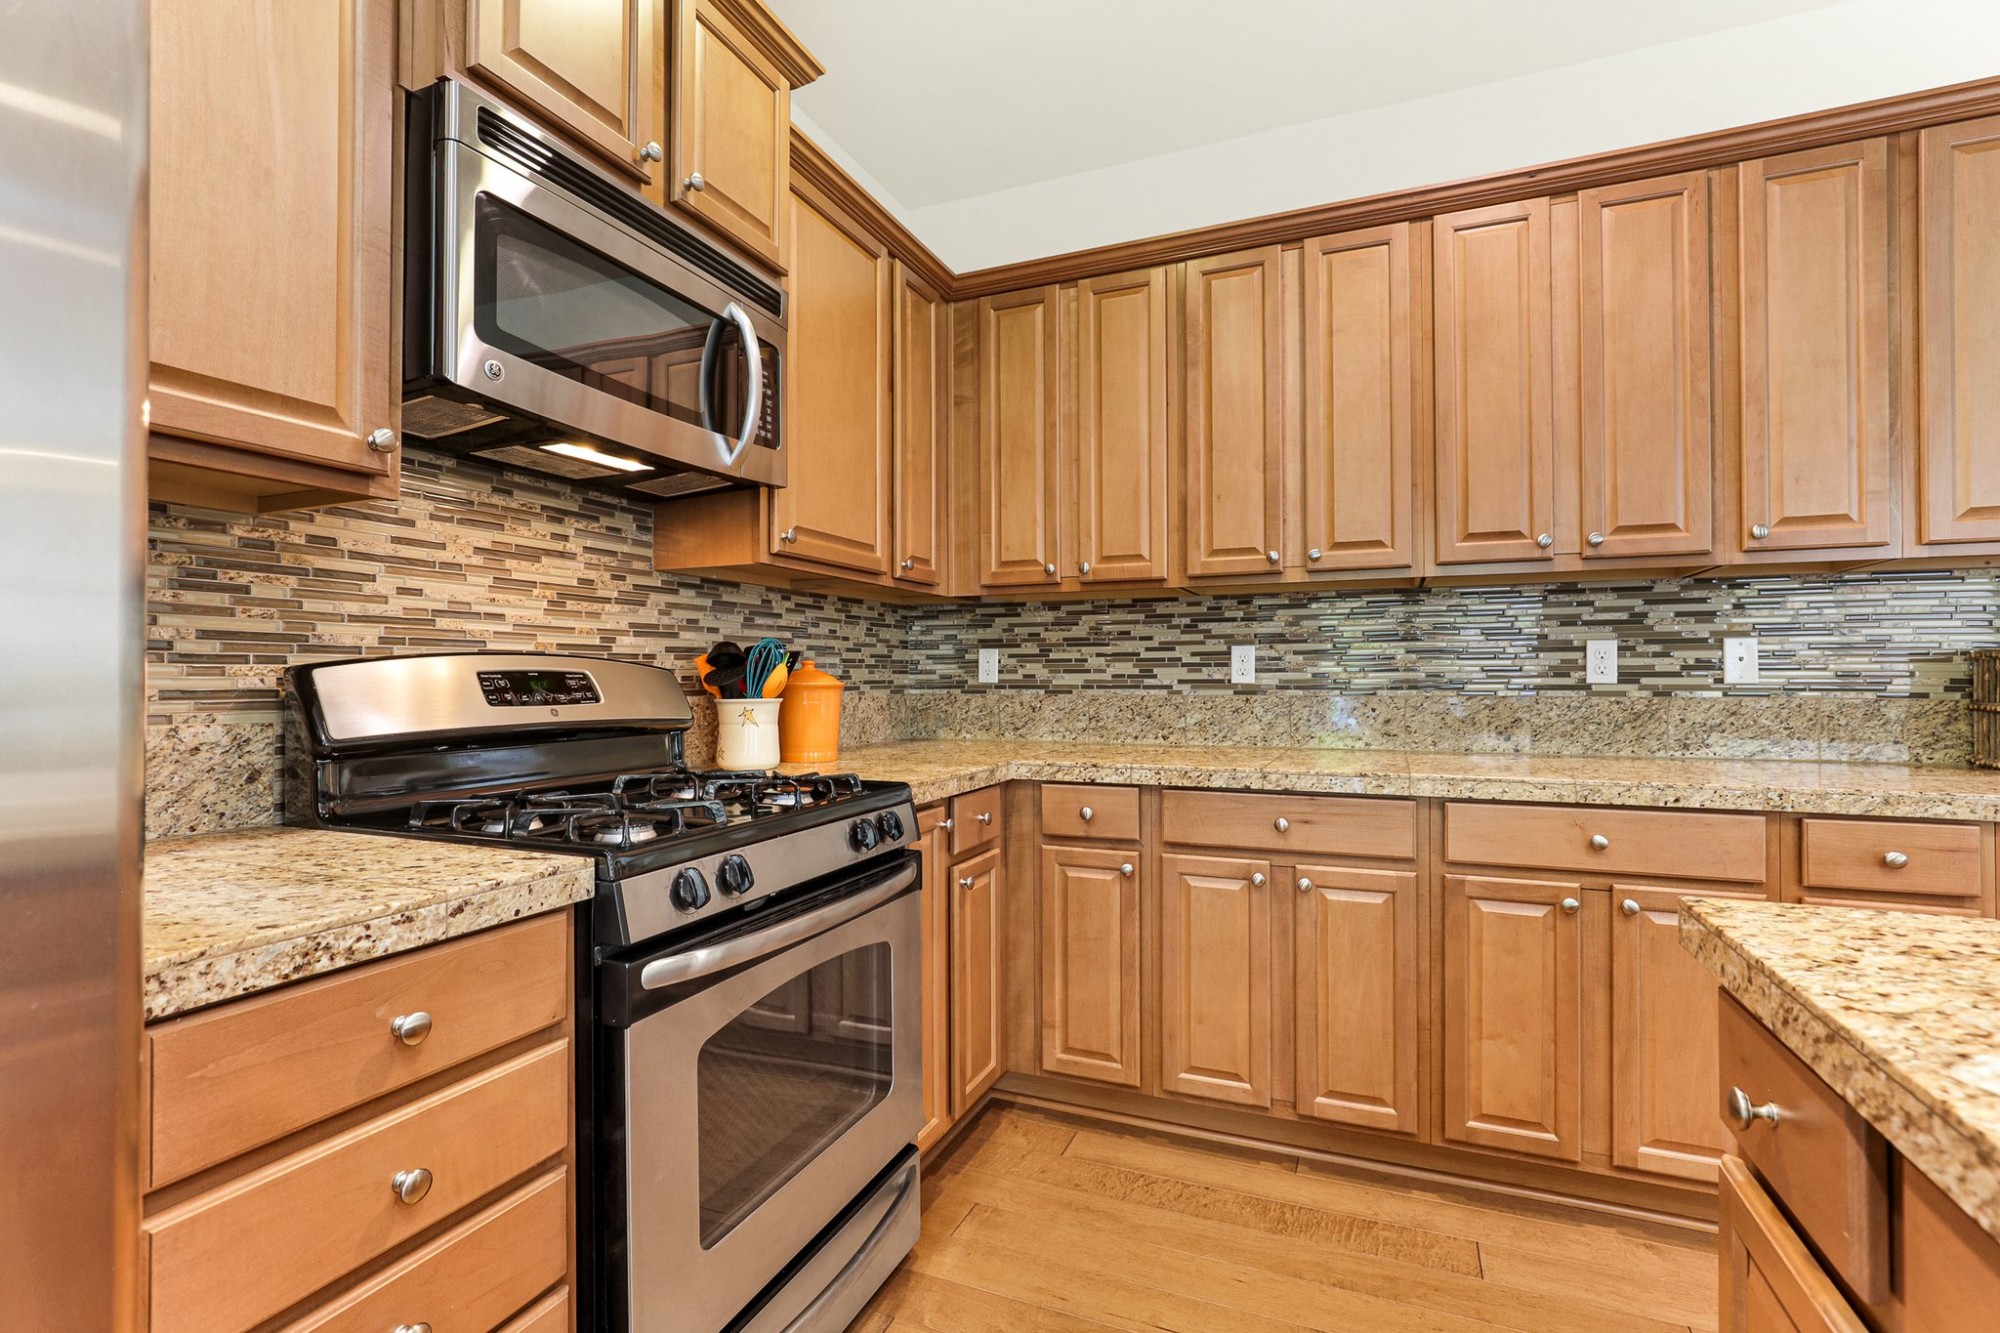 Lots of cabinetry and granite countertop space. 